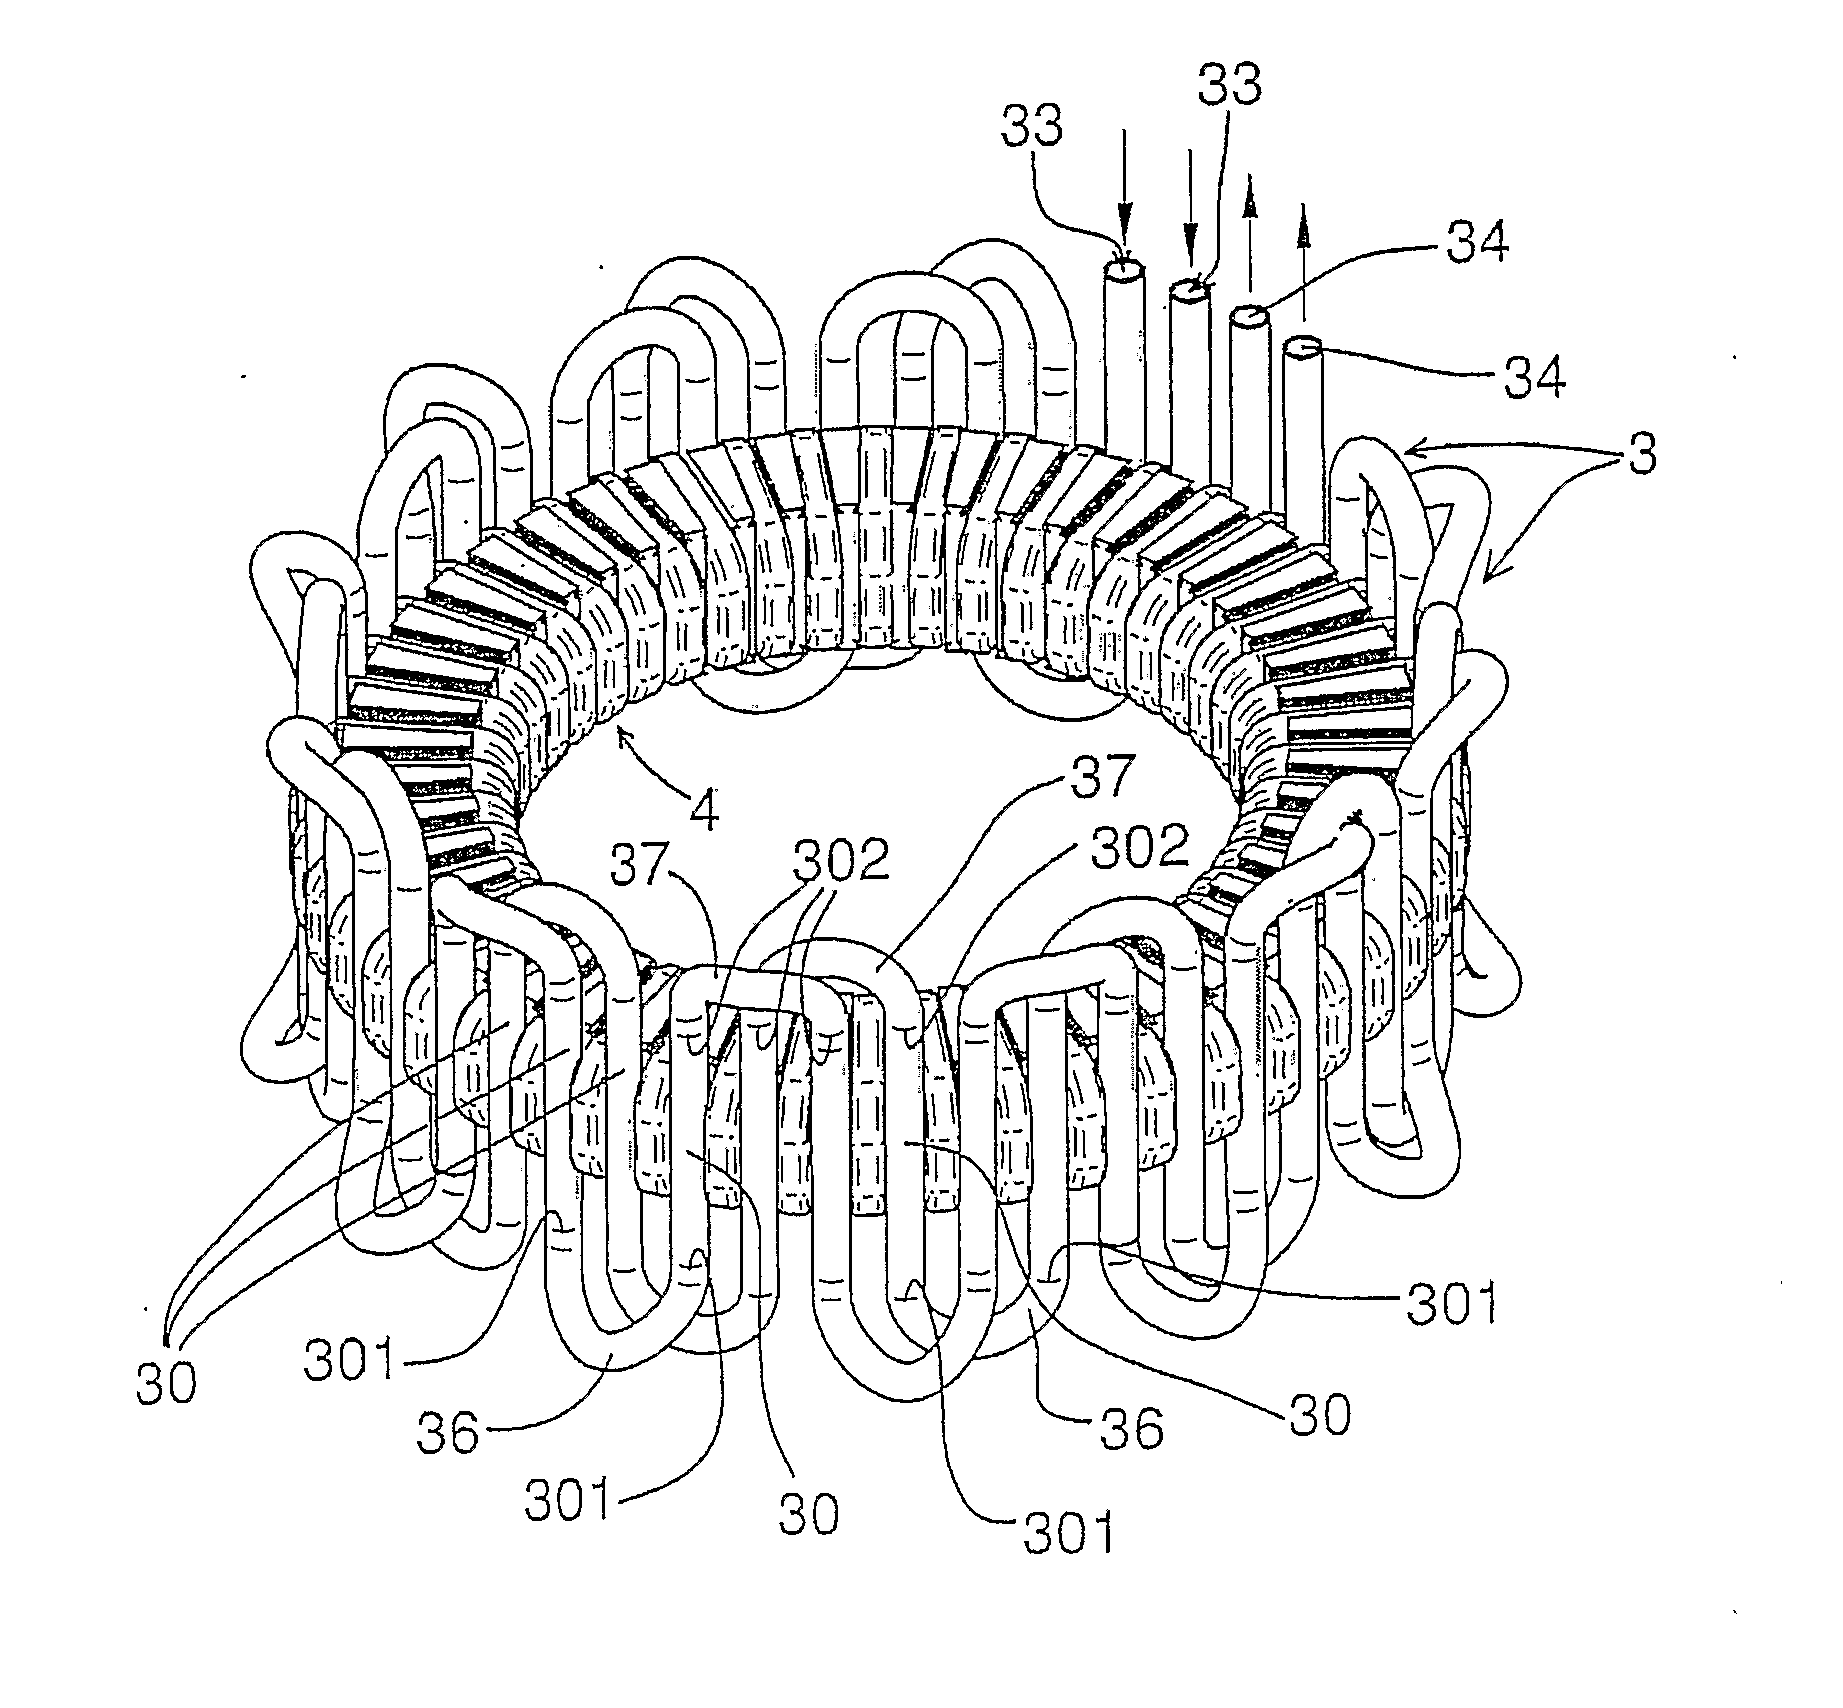 Stator section for an axial flux electric machine with liquid cooling system